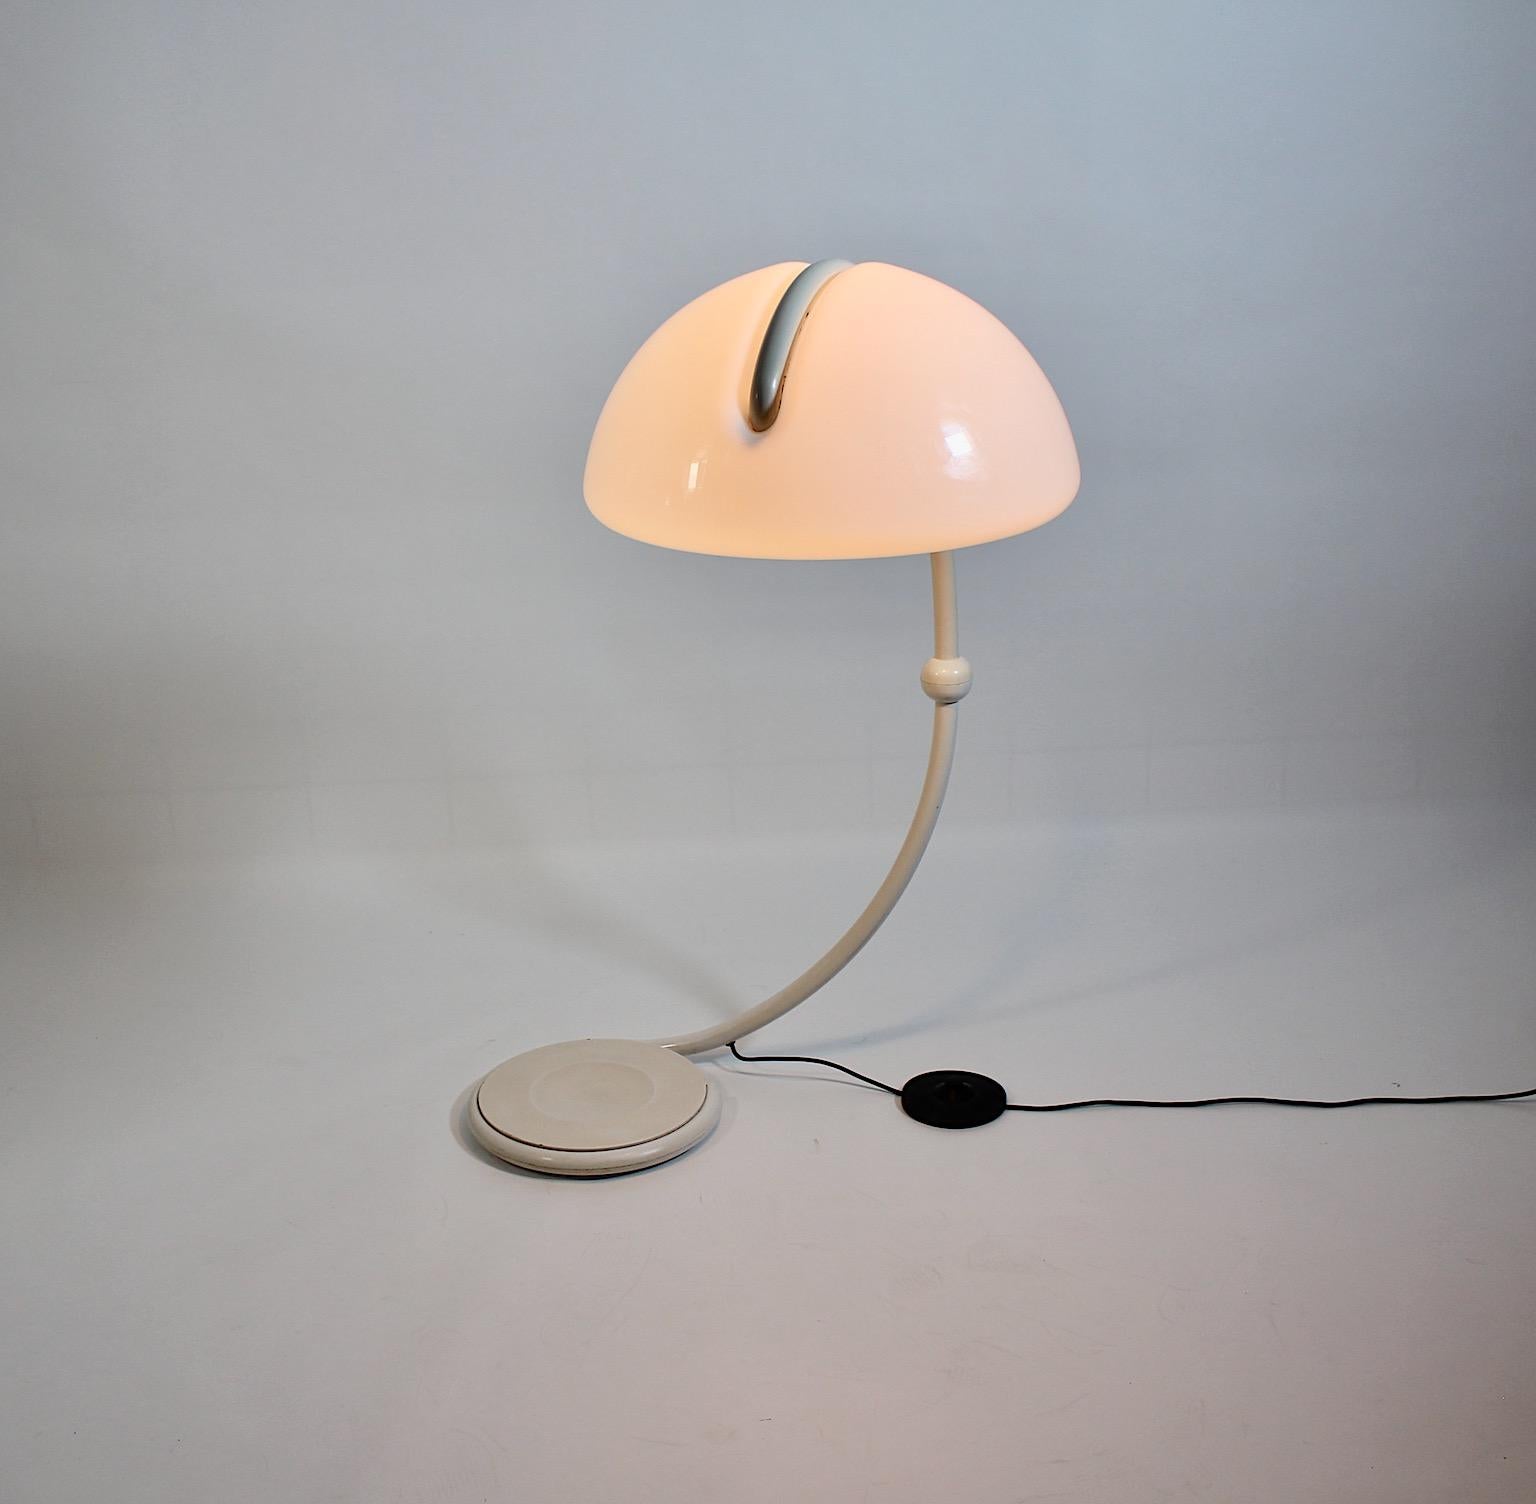 Space Age Vintage Floor Lamp White Plastic Metal Elio Martinelli 1970s Italy In Good Condition For Sale In Vienna, AT